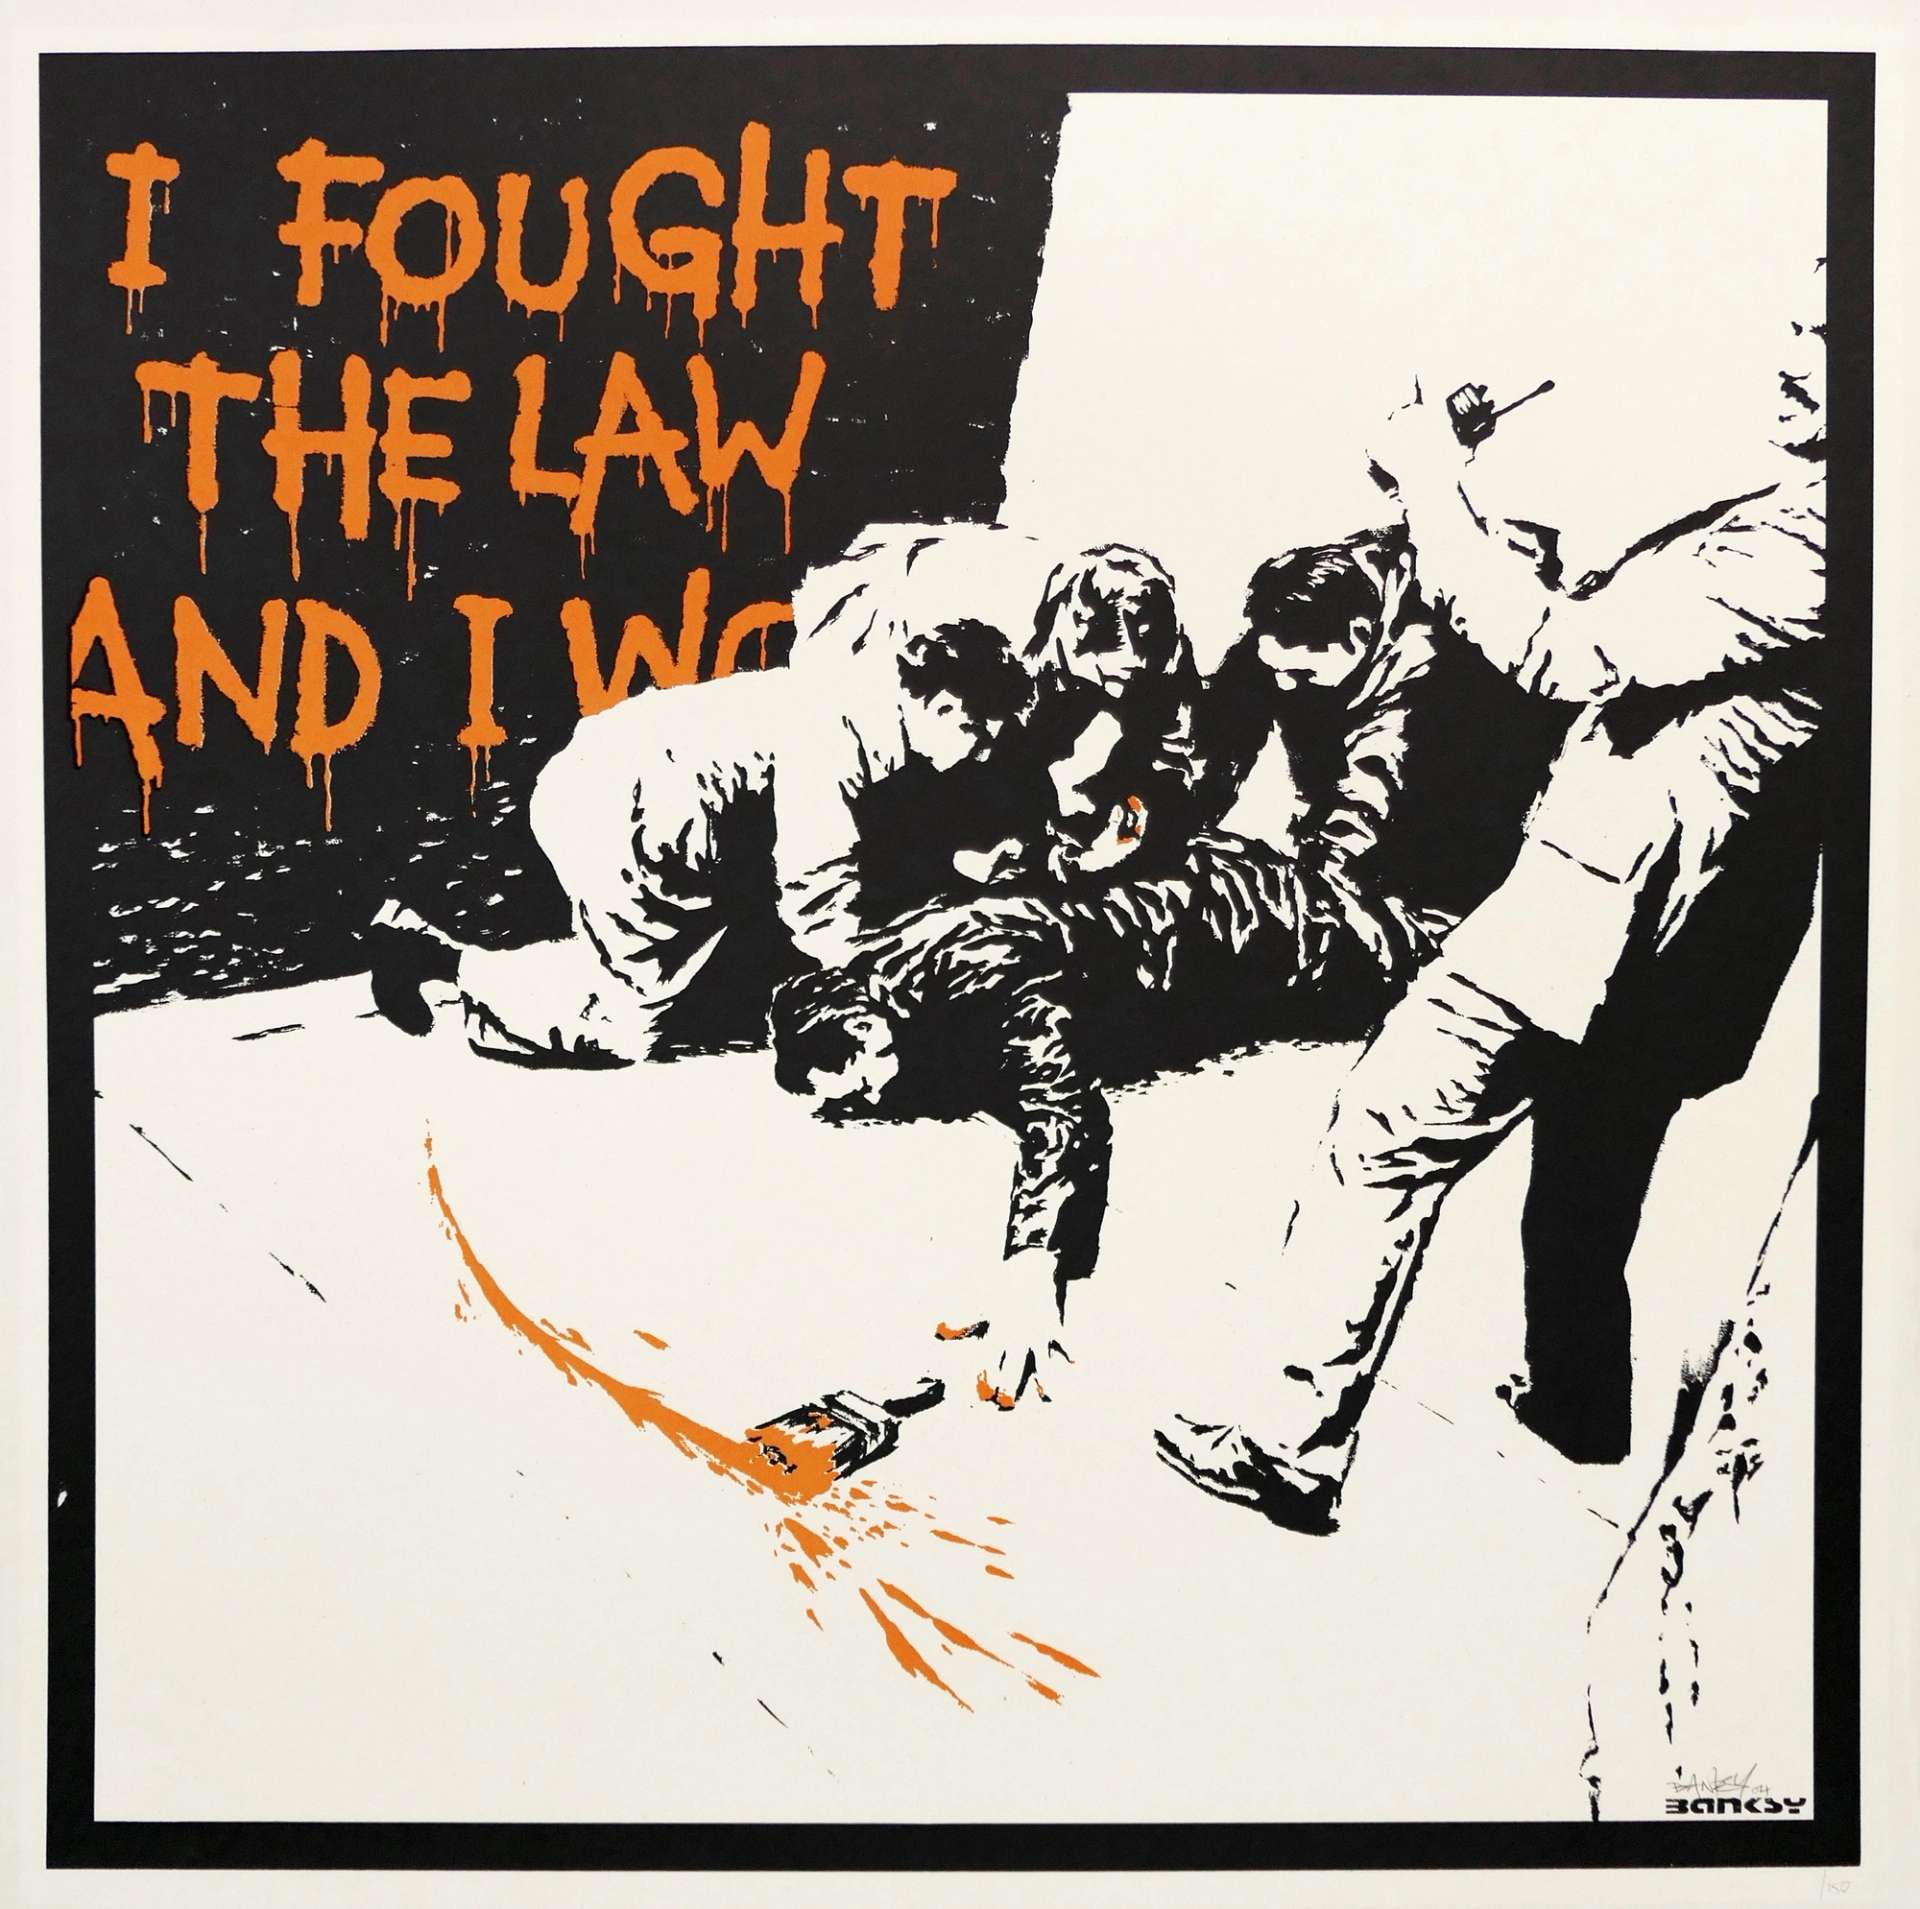 I Fought The Law - Signed Print by Banksy 2004 - MyArtBroker